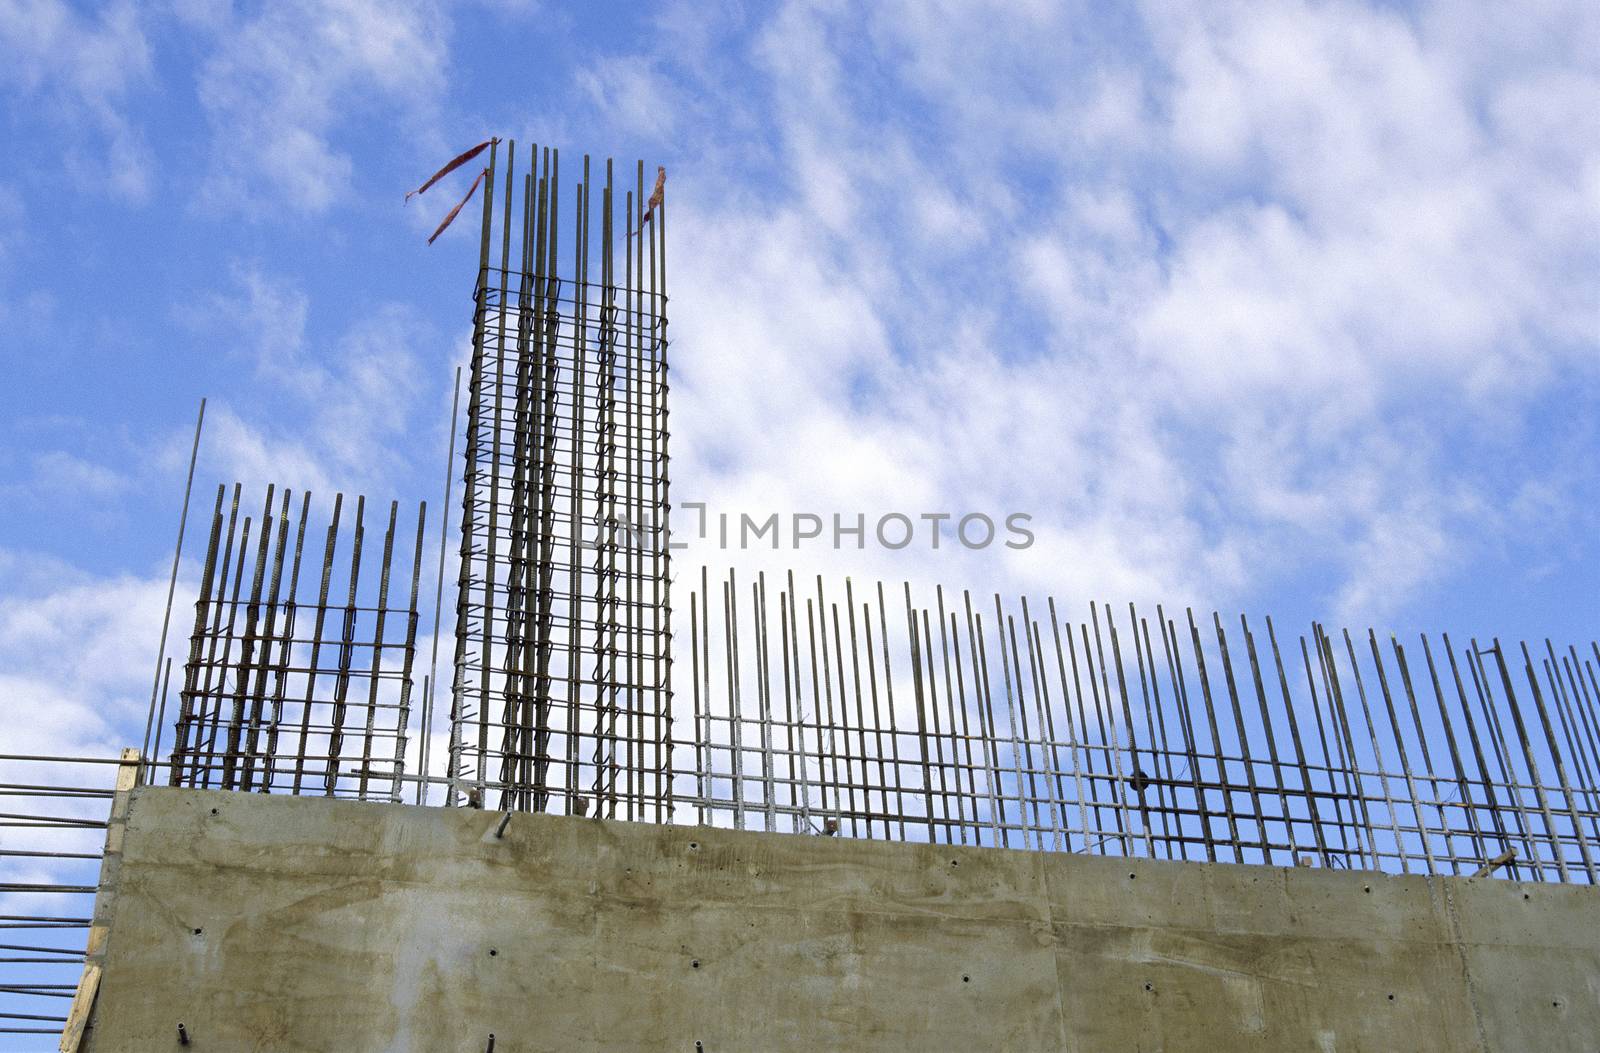 Rebar and concrete wall construction